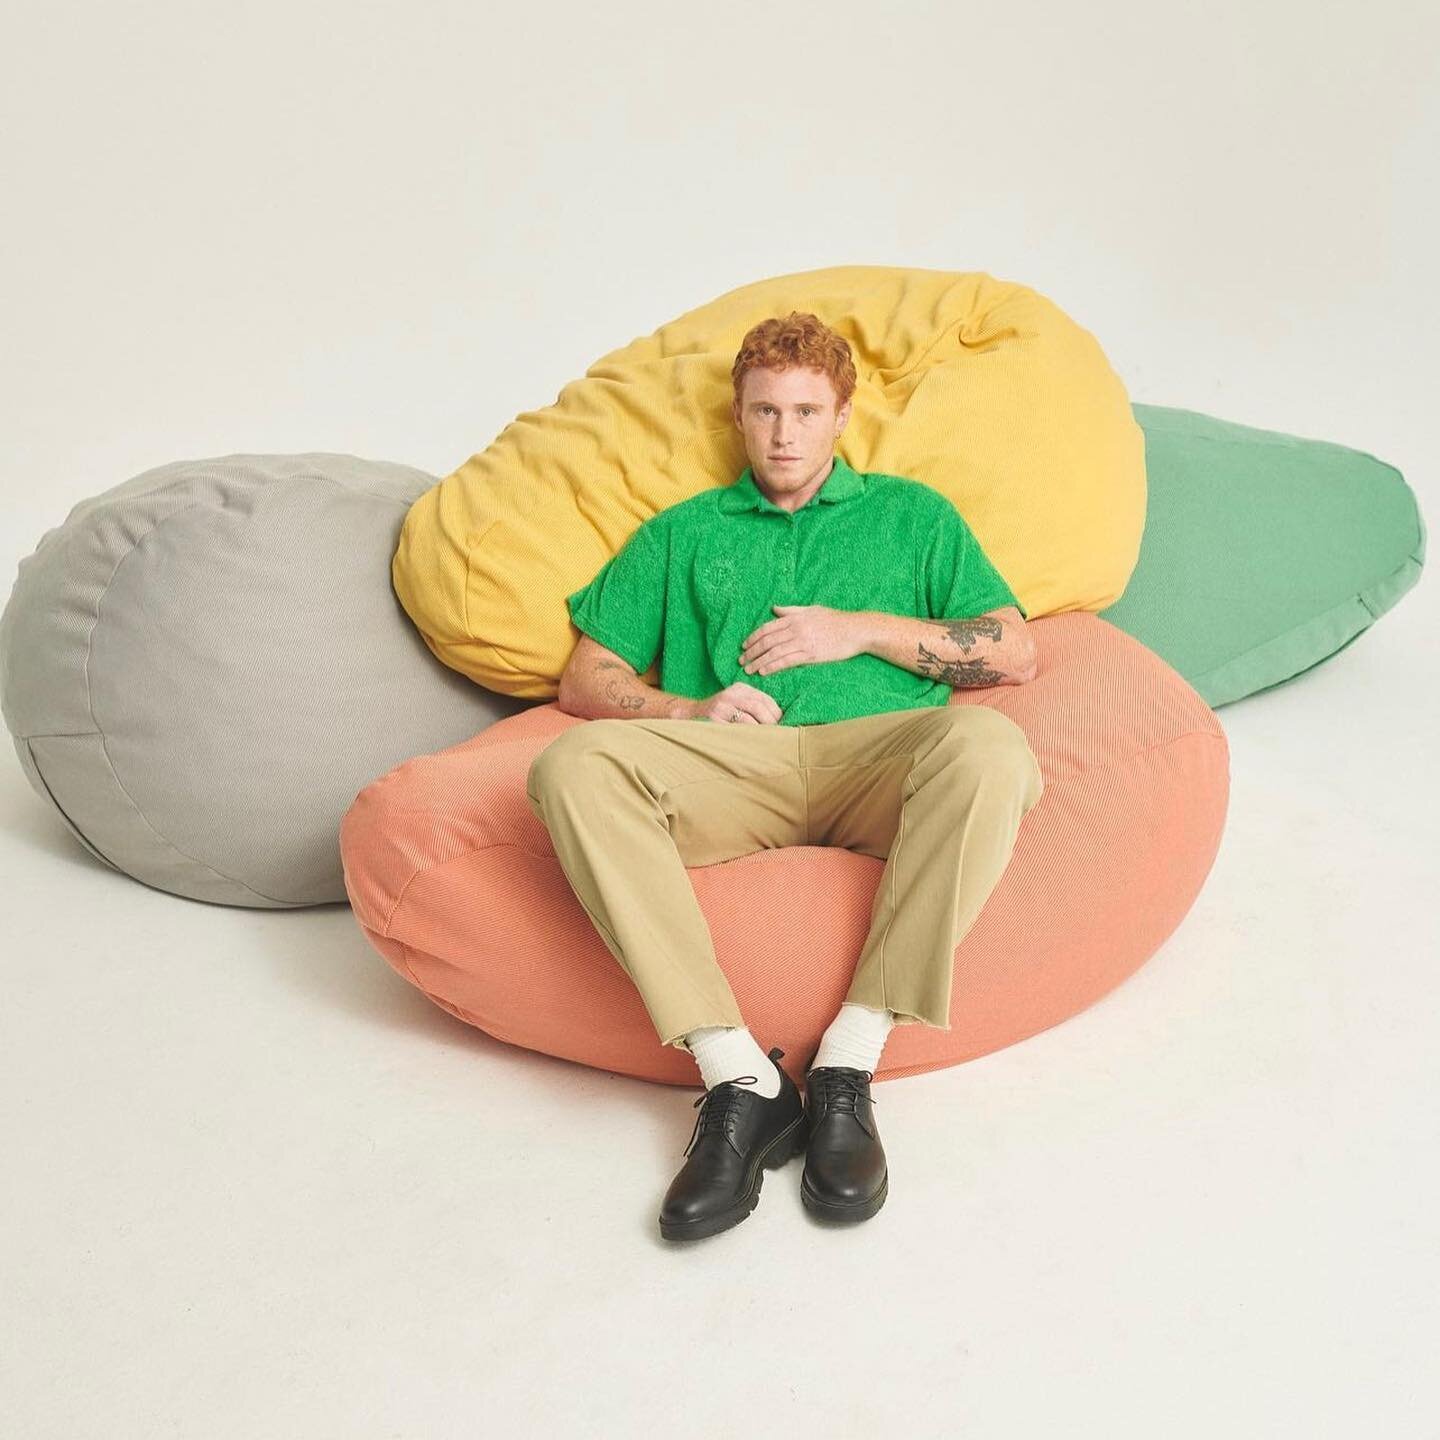 @floyddetroit takes their relaxation seriously with the Squishy Chair and so should you. It&rsquo;s not a pillow, a bed, nor a chair&mdash; which keeps things interesting wherever you may be doing *it*. The great news? It never loses its form over ti